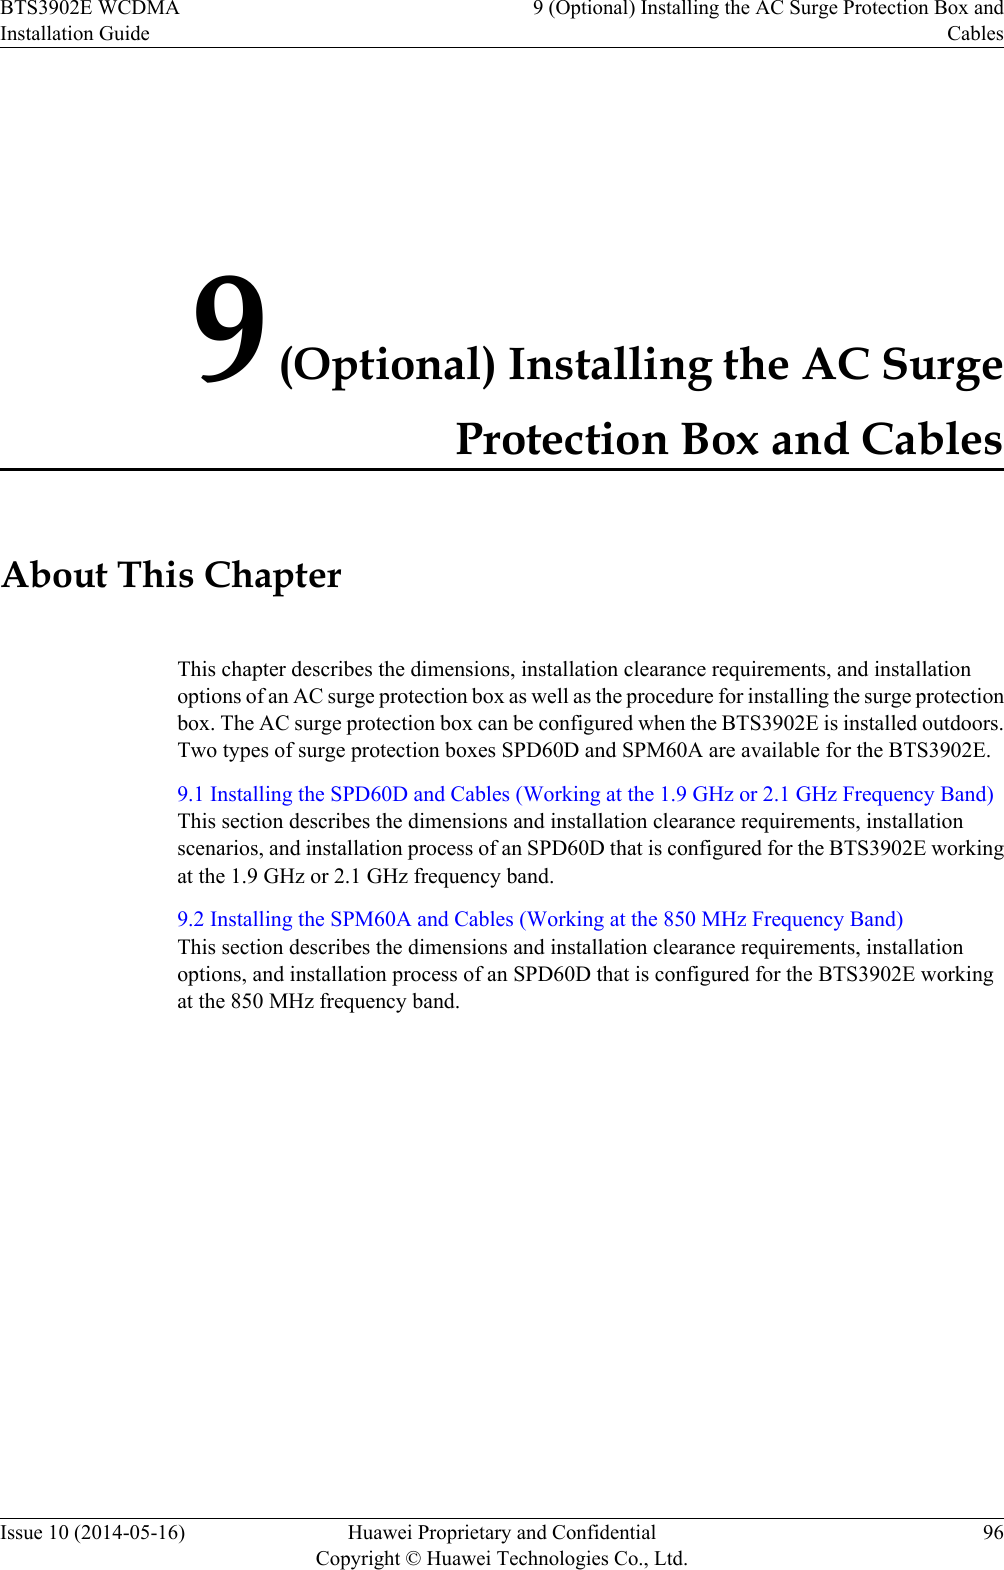 9 (Optional) Installing the AC SurgeProtection Box and CablesAbout This ChapterThis chapter describes the dimensions, installation clearance requirements, and installationoptions of an AC surge protection box as well as the procedure for installing the surge protectionbox. The AC surge protection box can be configured when the BTS3902E is installed outdoors.Two types of surge protection boxes SPD60D and SPM60A are available for the BTS3902E.9.1 Installing the SPD60D and Cables (Working at the 1.9 GHz or 2.1 GHz Frequency Band)This section describes the dimensions and installation clearance requirements, installationscenarios, and installation process of an SPD60D that is configured for the BTS3902E workingat the 1.9 GHz or 2.1 GHz frequency band.9.2 Installing the SPM60A and Cables (Working at the 850 MHz Frequency Band)This section describes the dimensions and installation clearance requirements, installationoptions, and installation process of an SPD60D that is configured for the BTS3902E workingat the 850 MHz frequency band.BTS3902E WCDMAInstallation Guide9 (Optional) Installing the AC Surge Protection Box andCablesIssue 10 (2014-05-16) Huawei Proprietary and ConfidentialCopyright © Huawei Technologies Co., Ltd.96